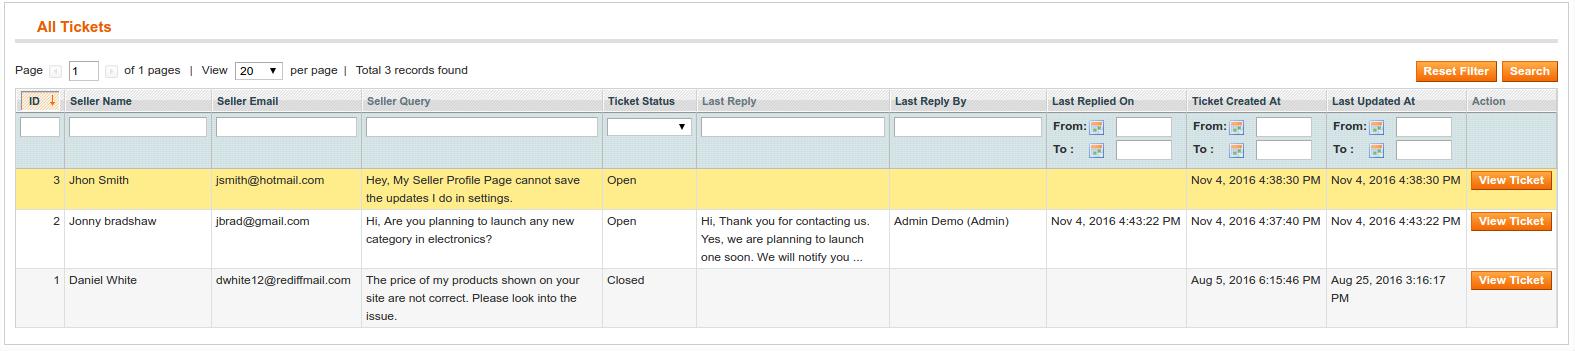 Magento marché Contact Admin Addon-View Tickets.1 |  Knowband